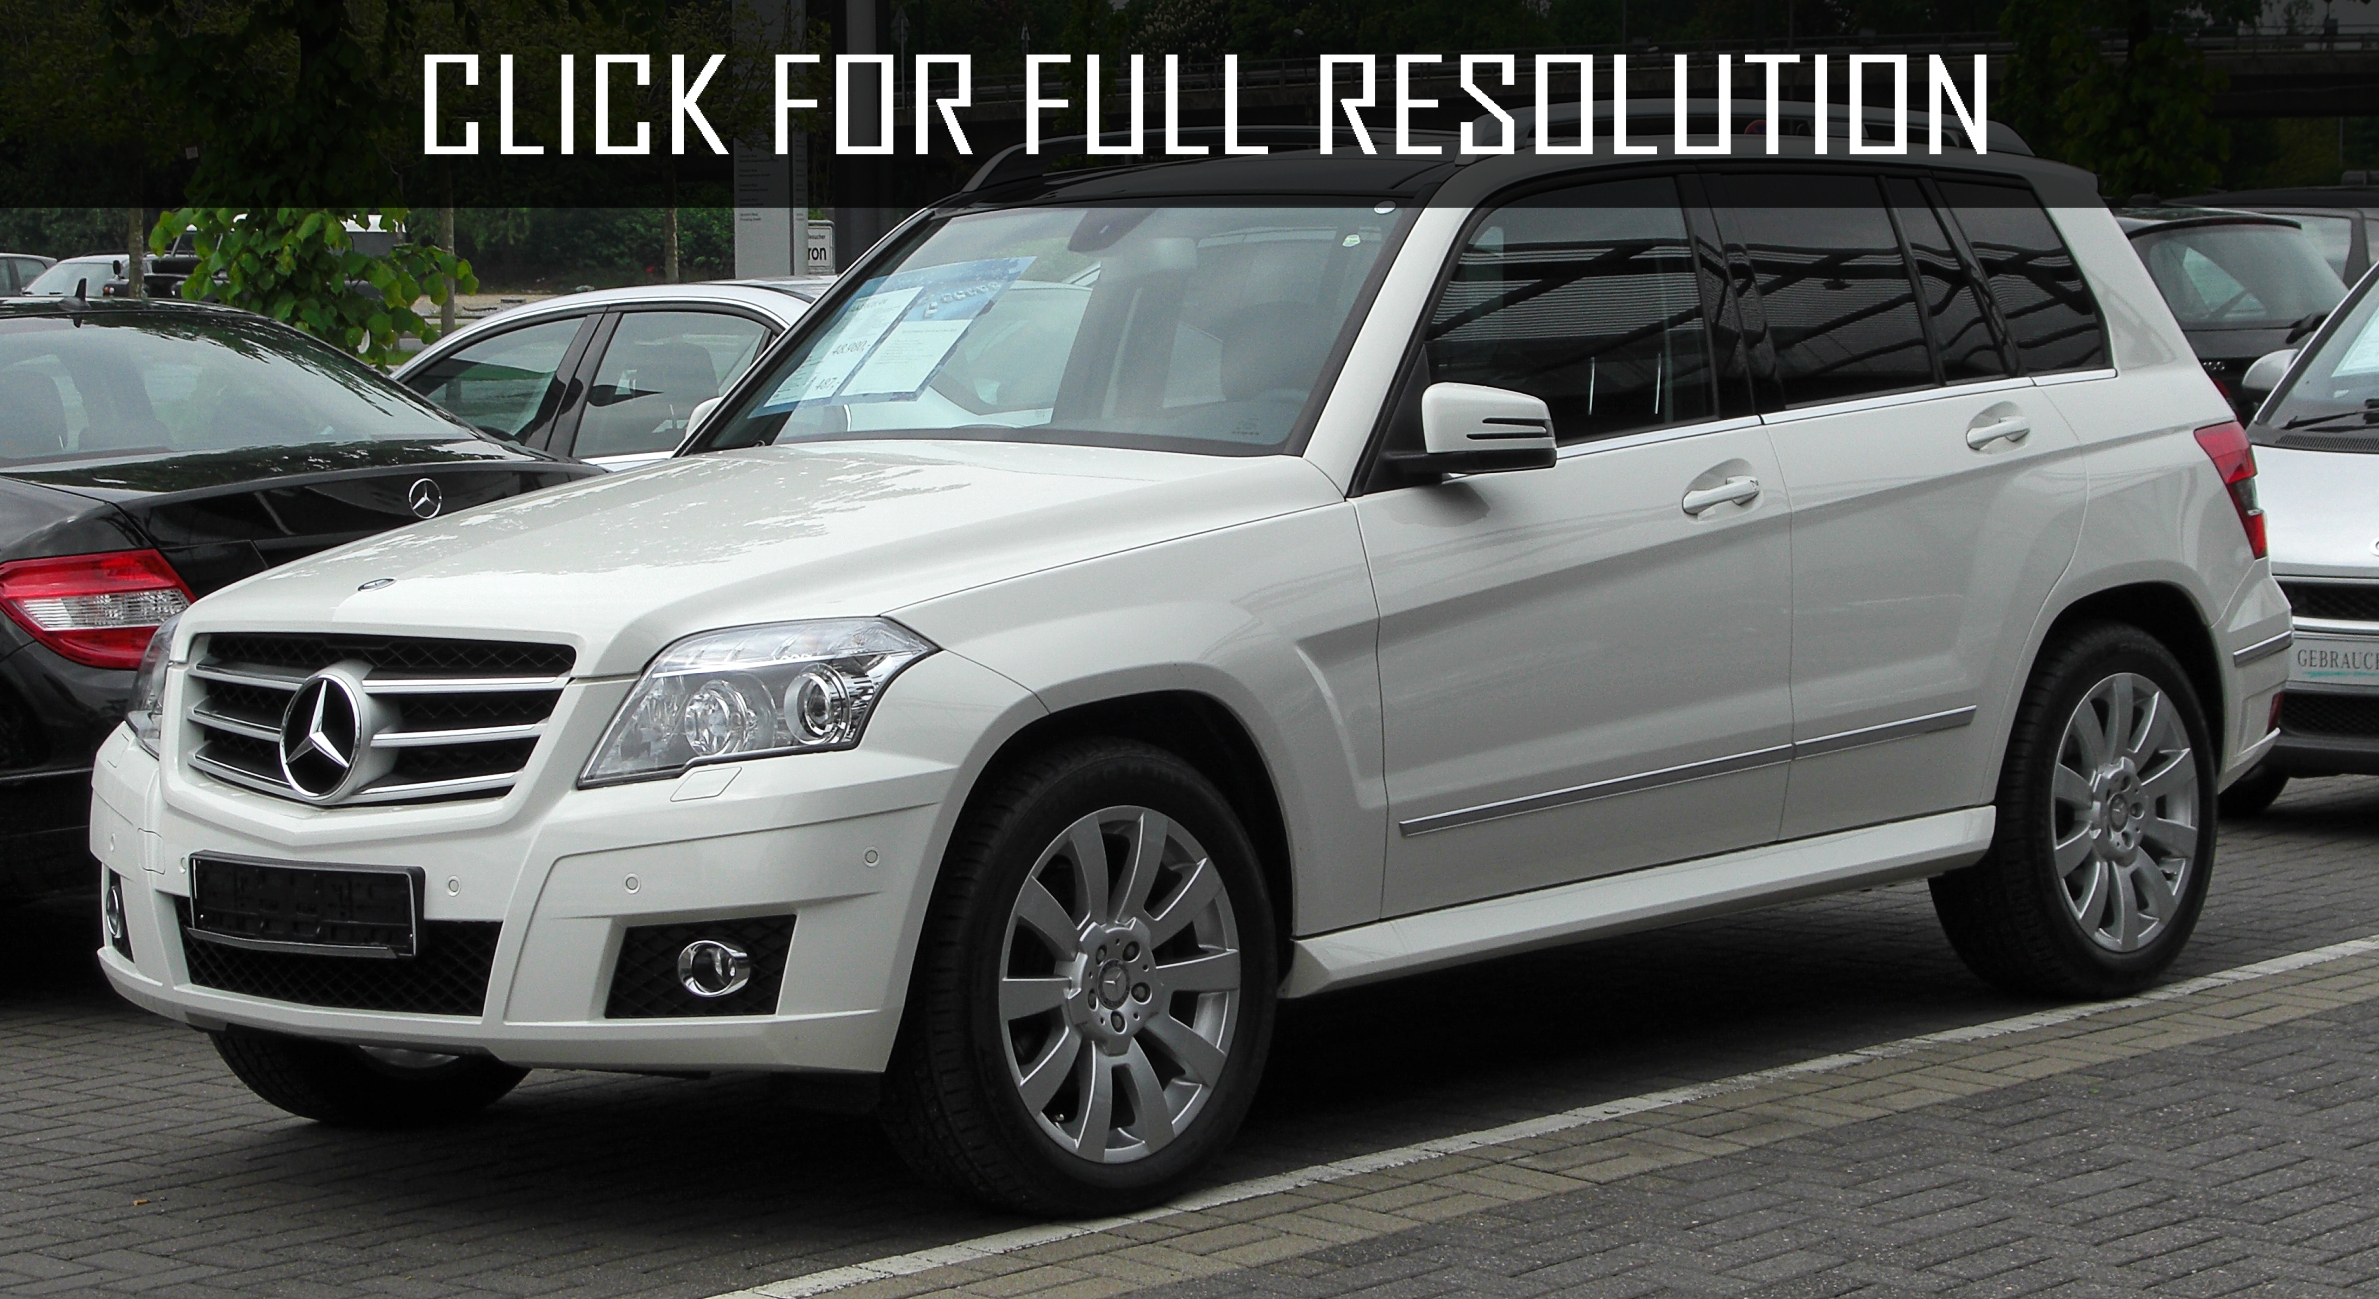 Mercedes Benz Glk 350 Cdi amazing photo gallery, some information and